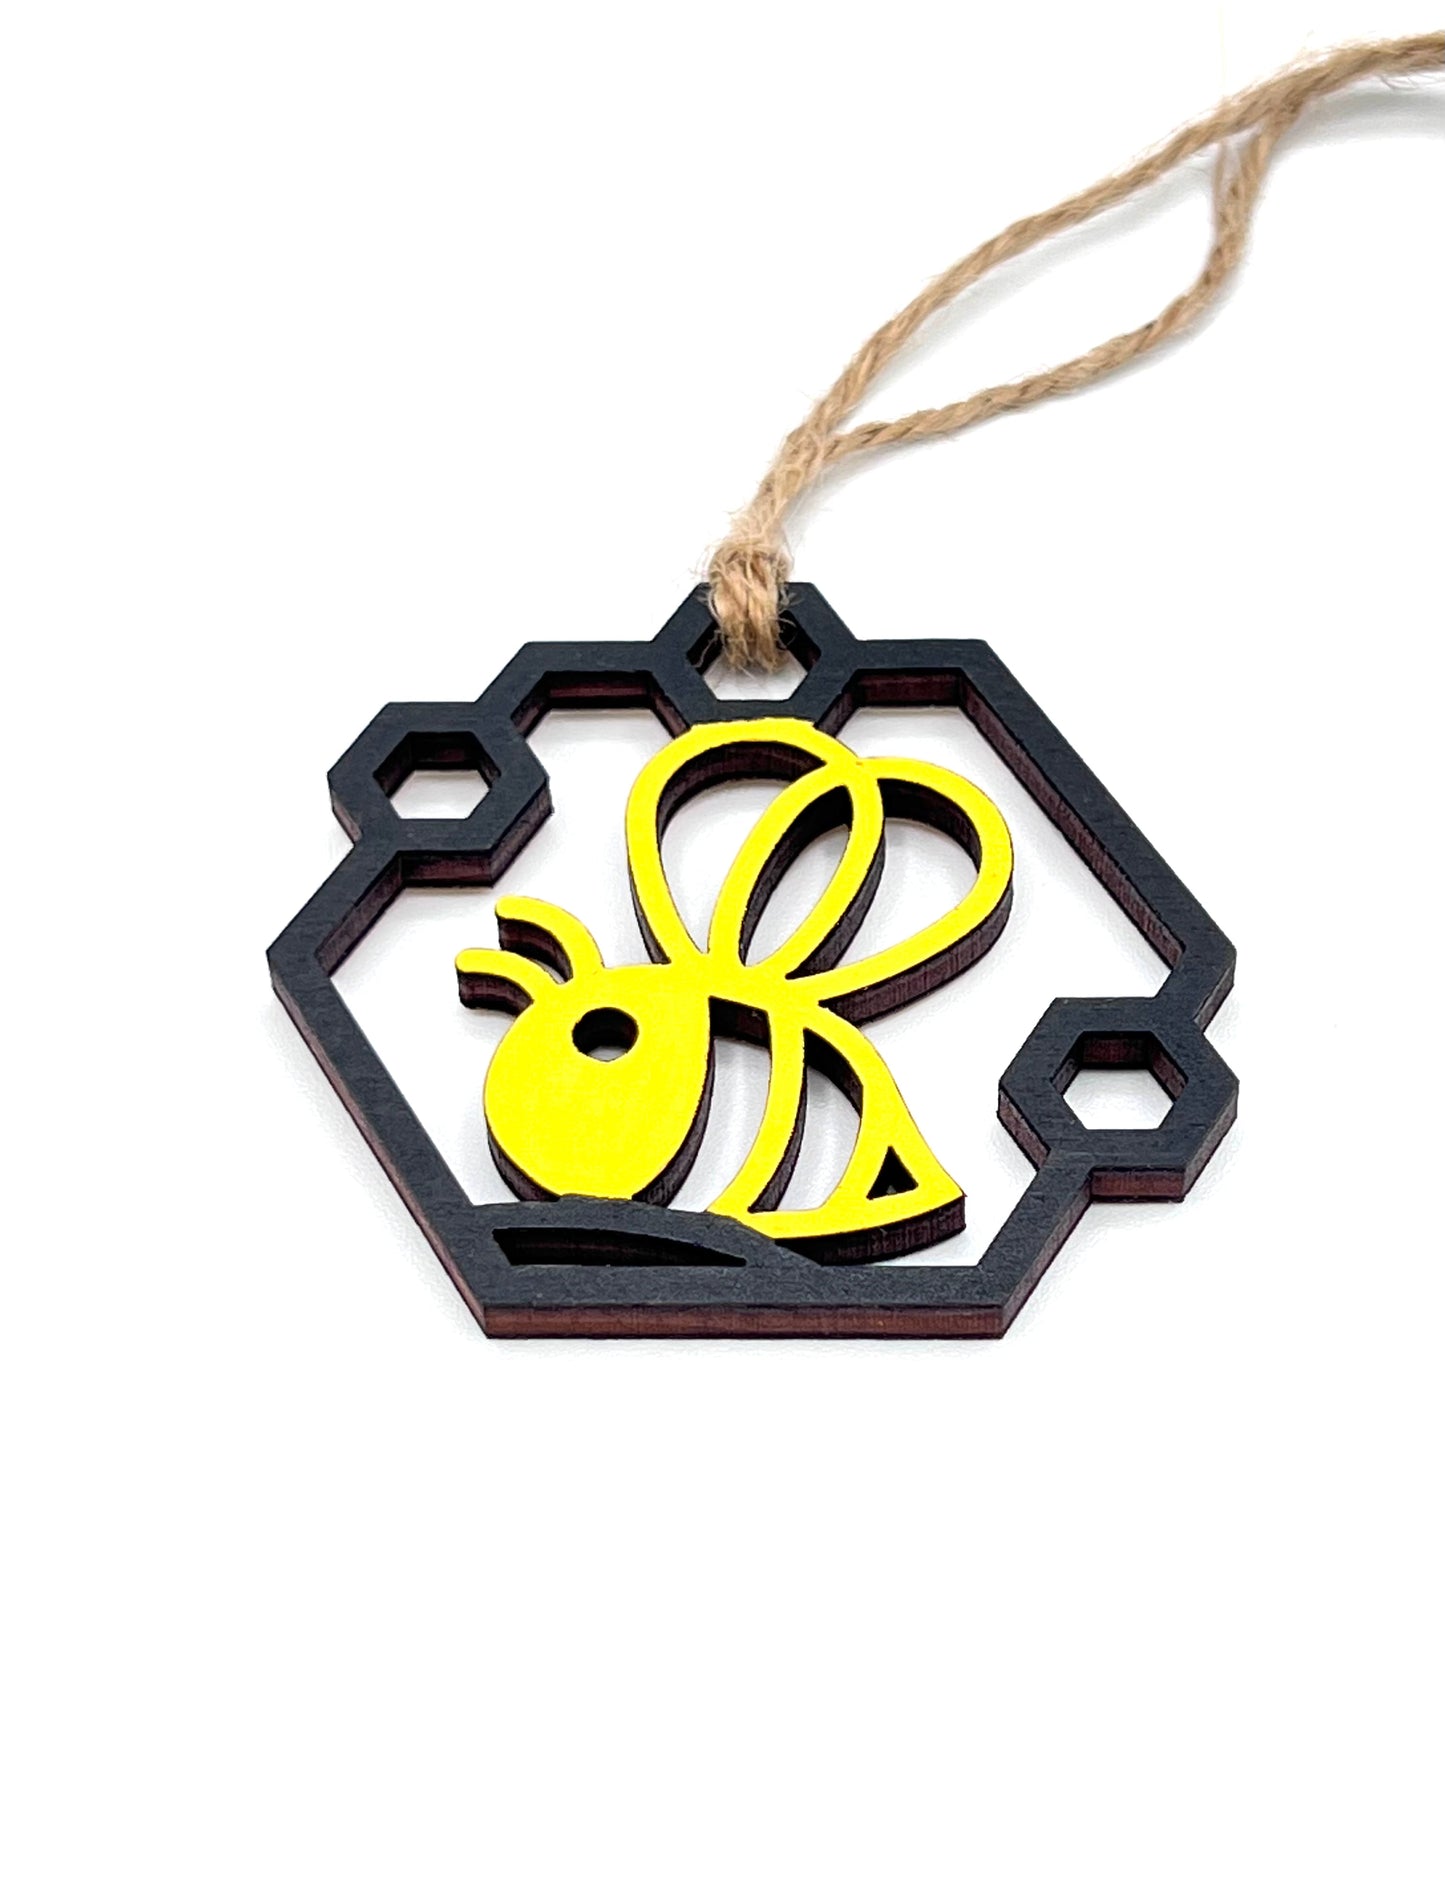 Bumble Bee Ornament